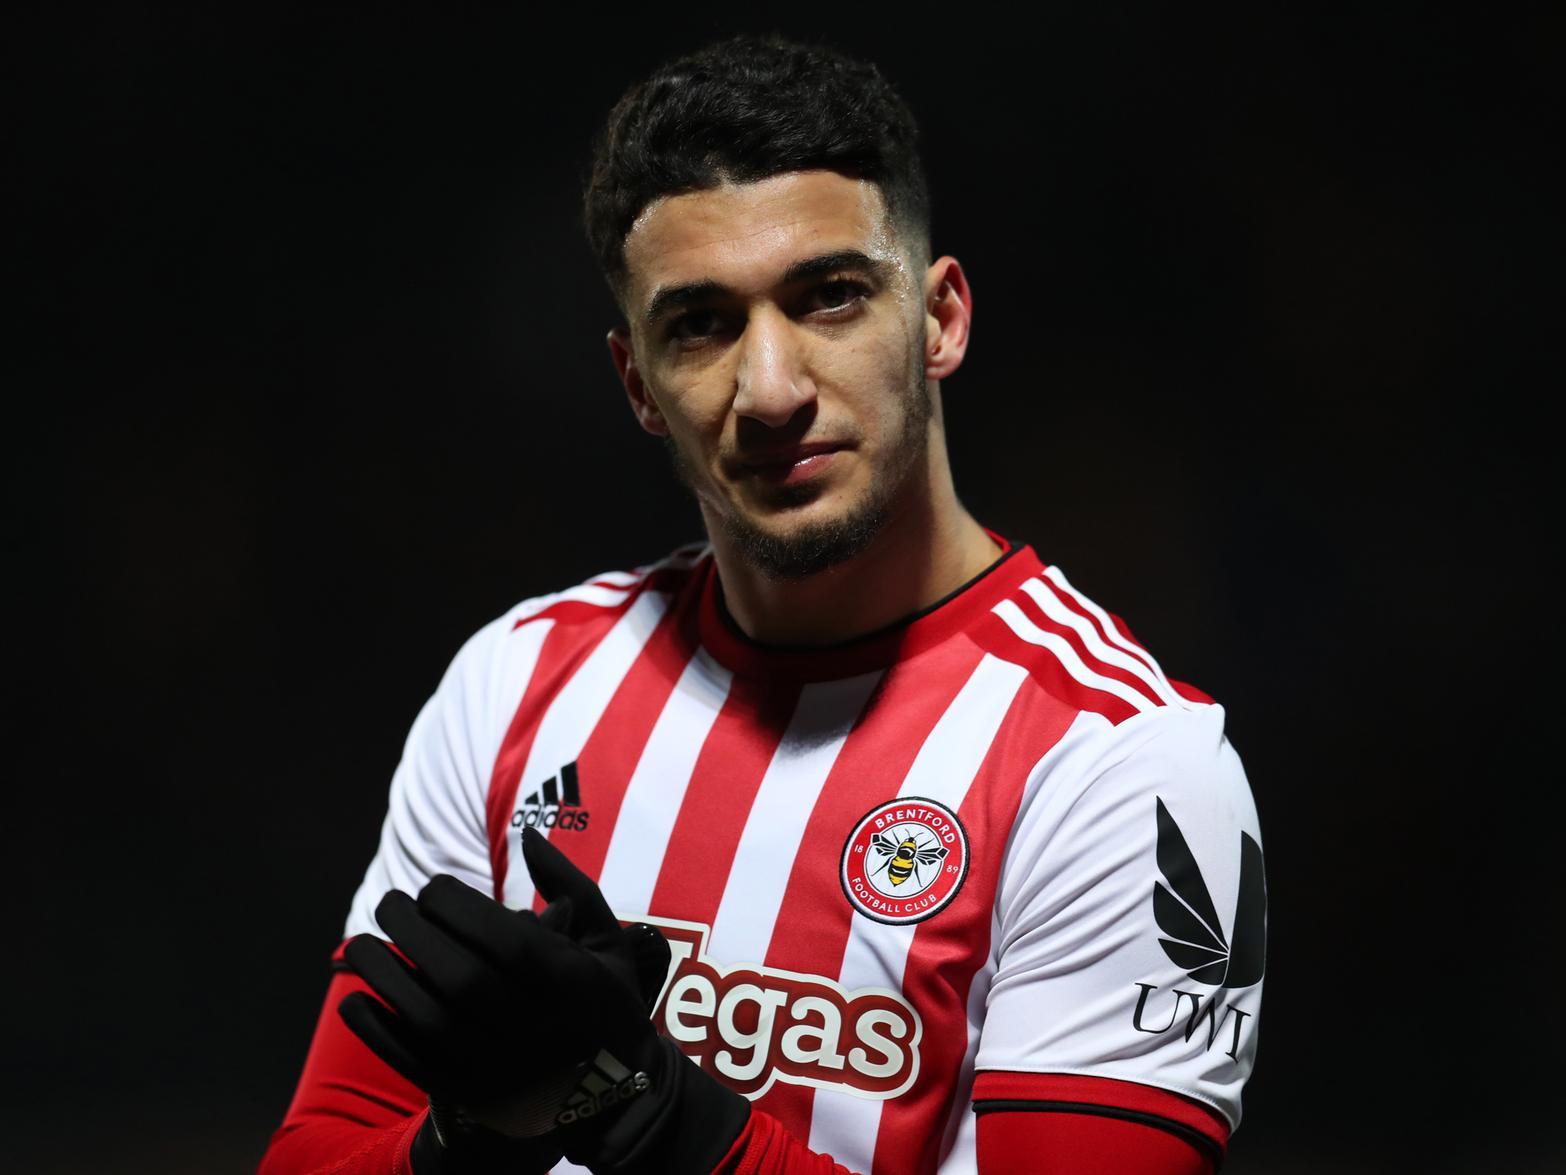 Leicester City appear to have more competition in their reported interest in signing Brentford winger Said Benrahma. (Leicestershire Live)